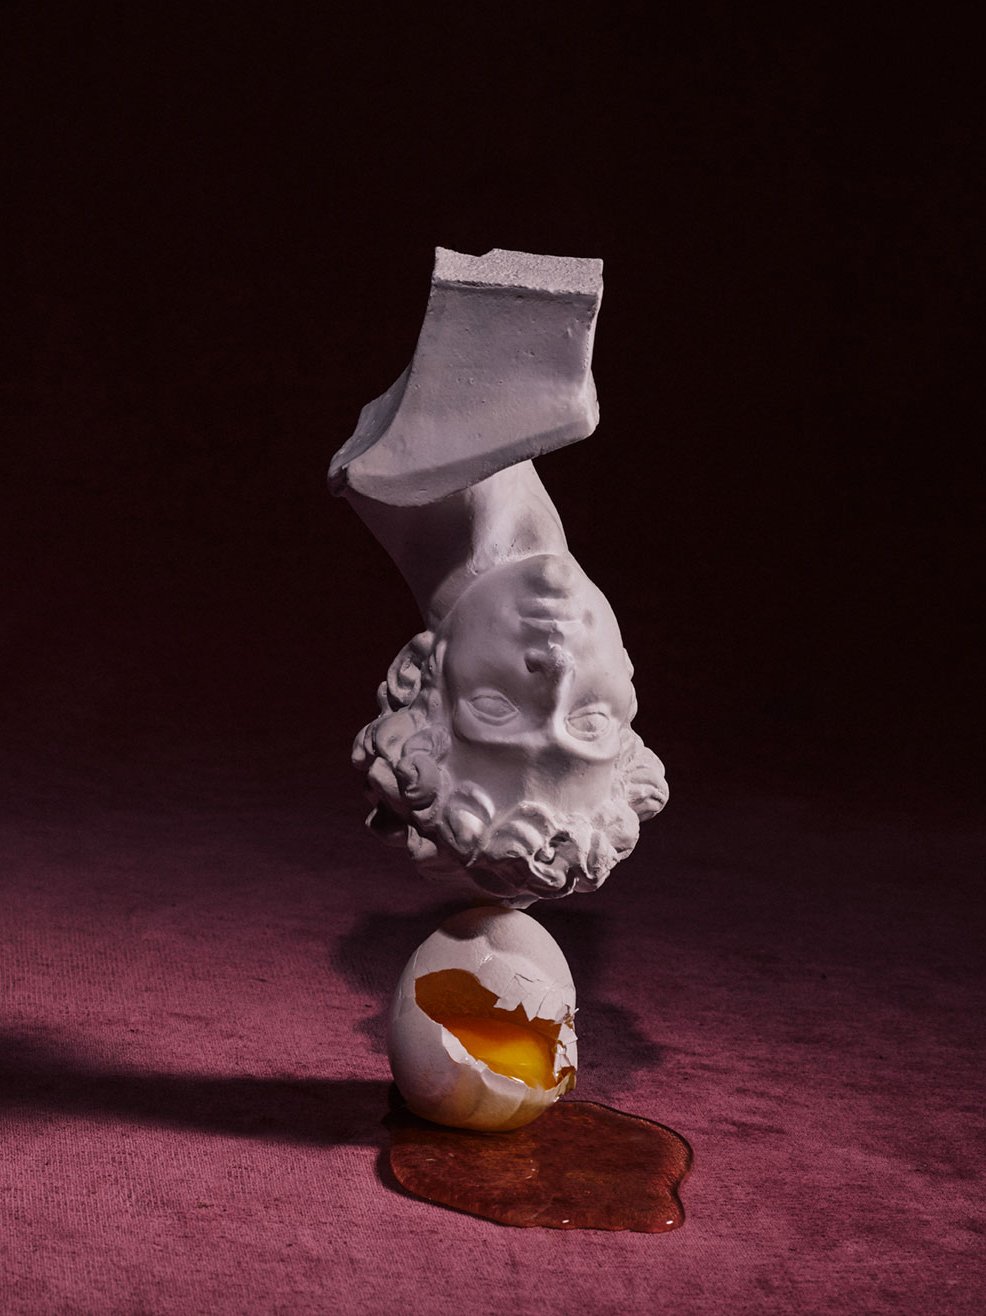 Still life image of upside down bust balancing on top of a broken egg. Romance Journal Issue 02 Resistance. Publication design, art direction, print design by RoAndCo.